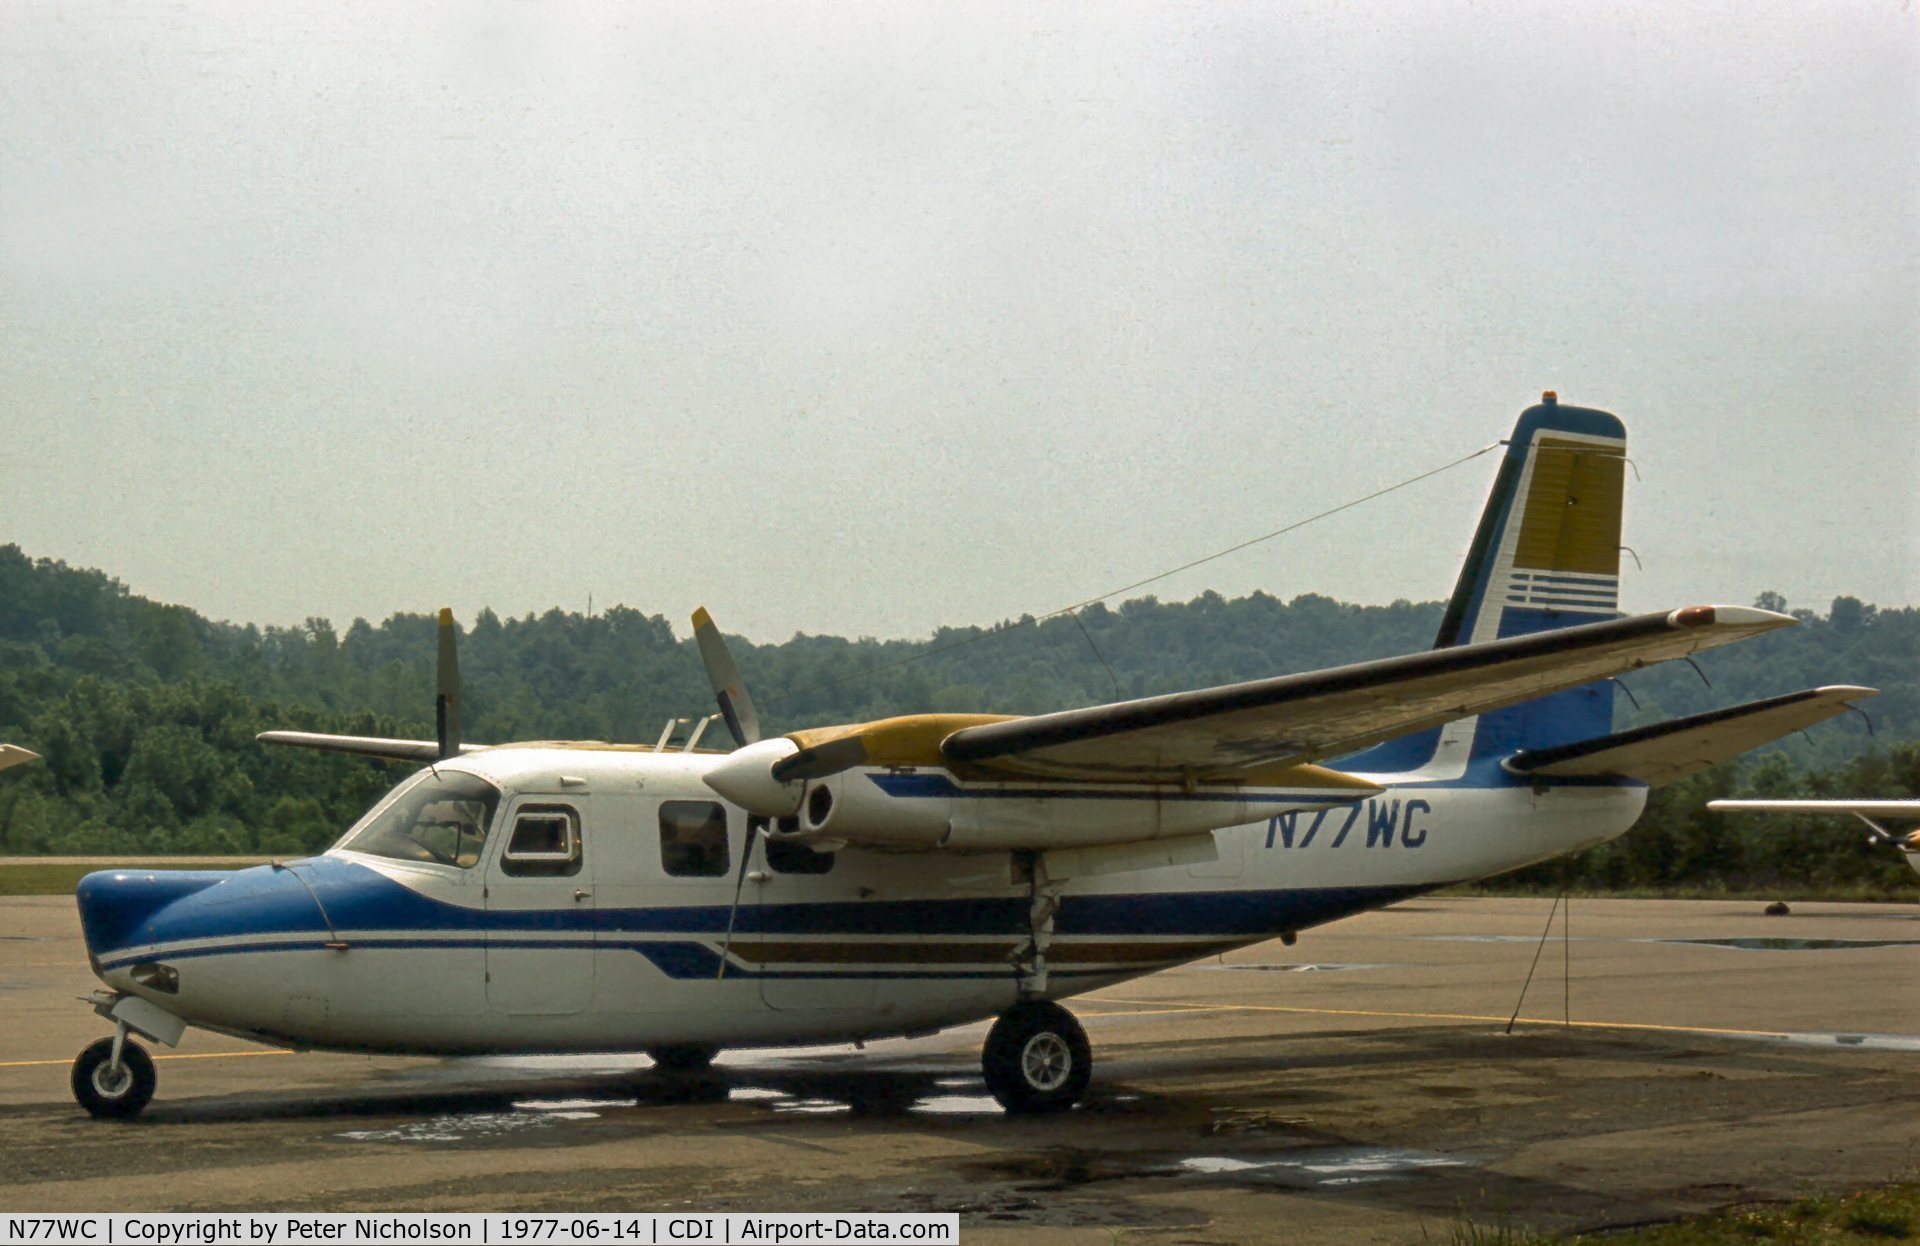 N77WC, 1962 Aero Commander 680-F C/N 680F-1206-108, This Aero Commander was seen at Cambridge in the Summer of 1977.